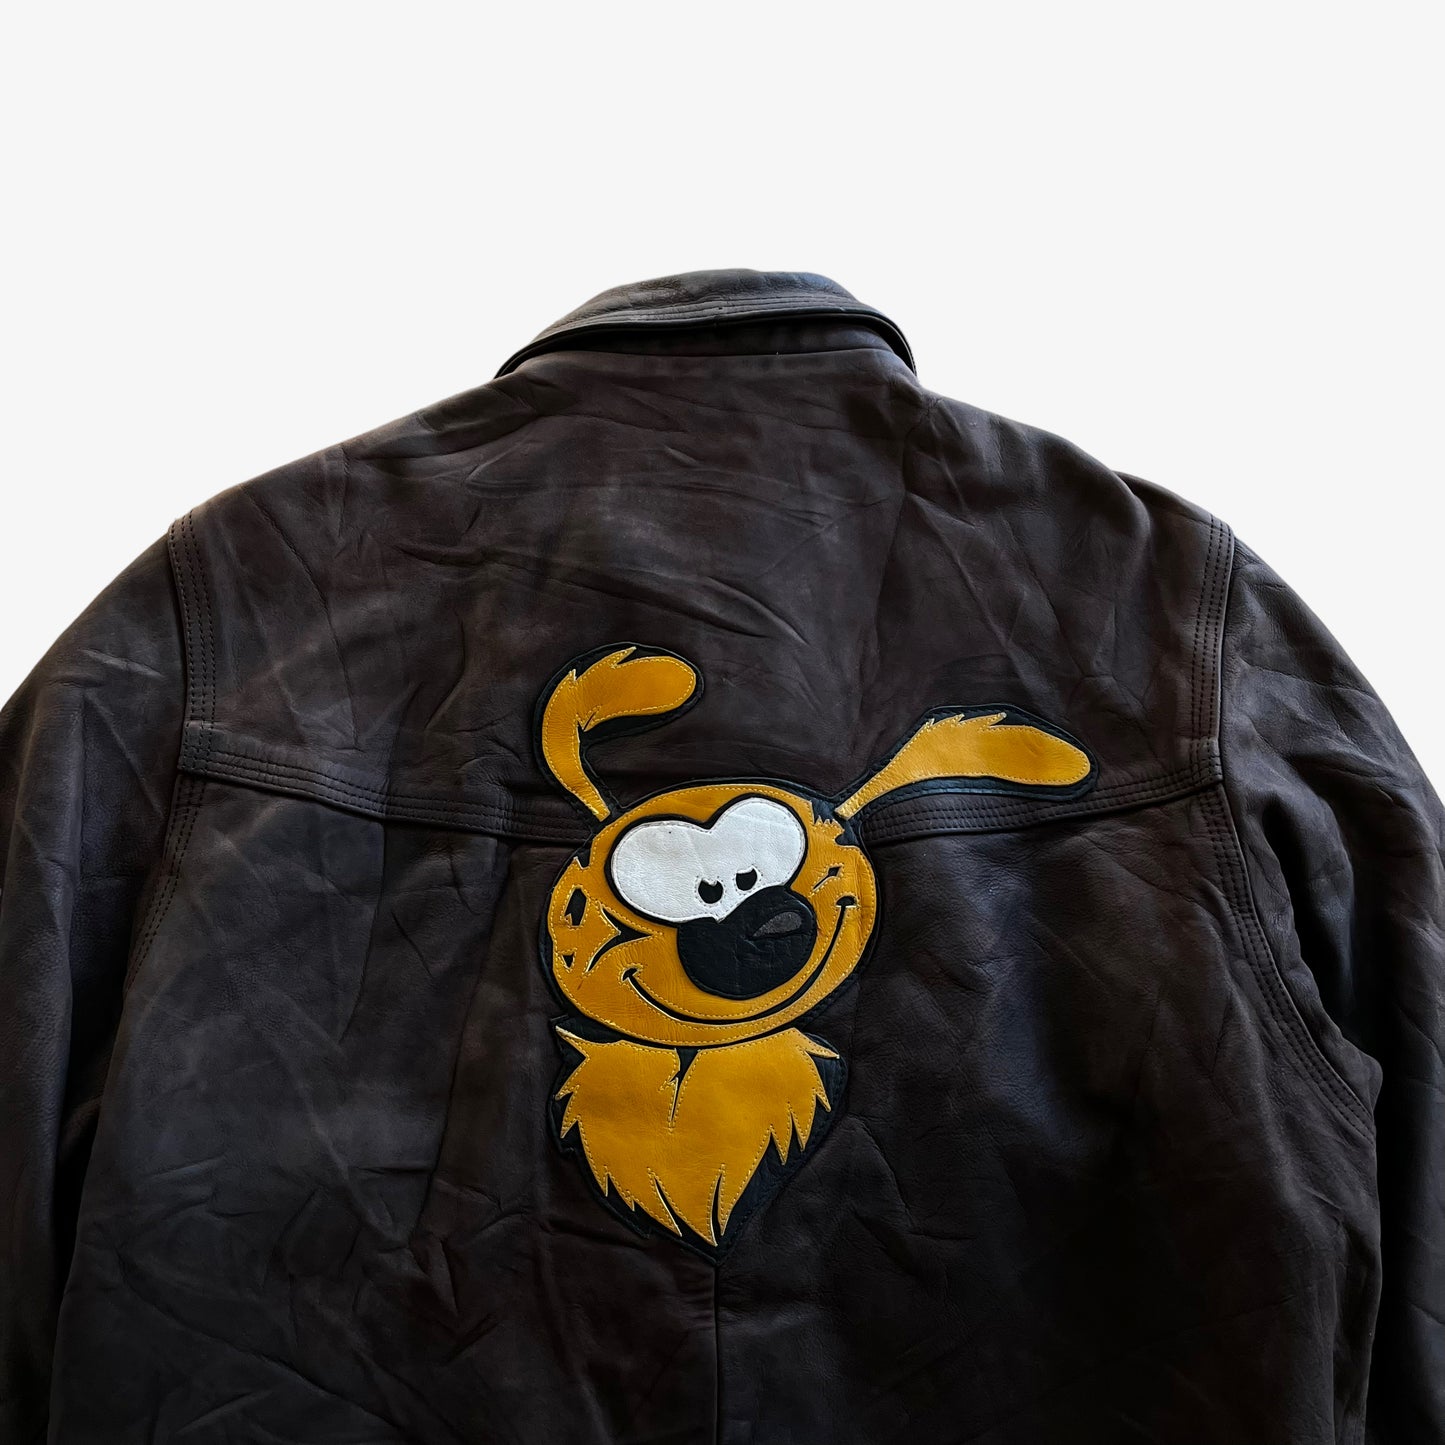 Vintage 90s Womens Flying Squad Brown Leather Pilot Jacket With Back Cartoon Dog Patch Logo - Casspios Dream